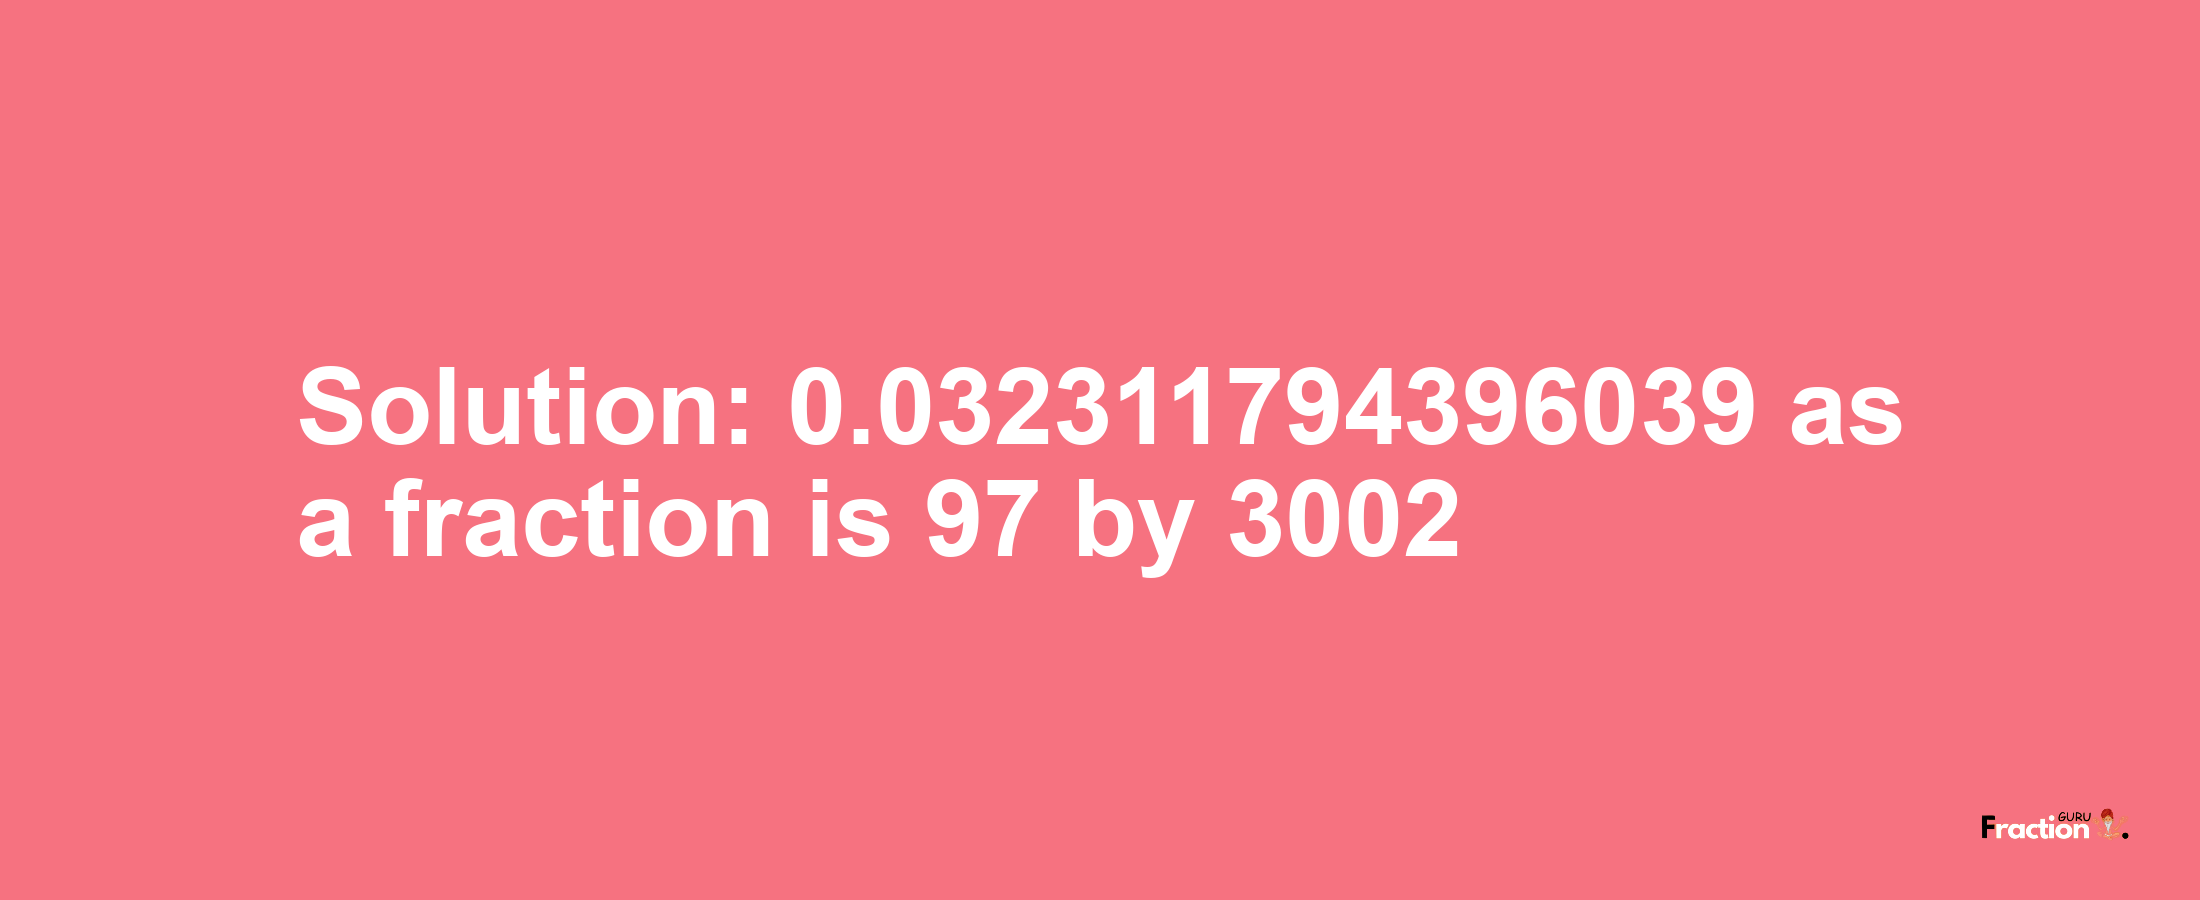 Solution:0.032311794396039 as a fraction is 97/3002